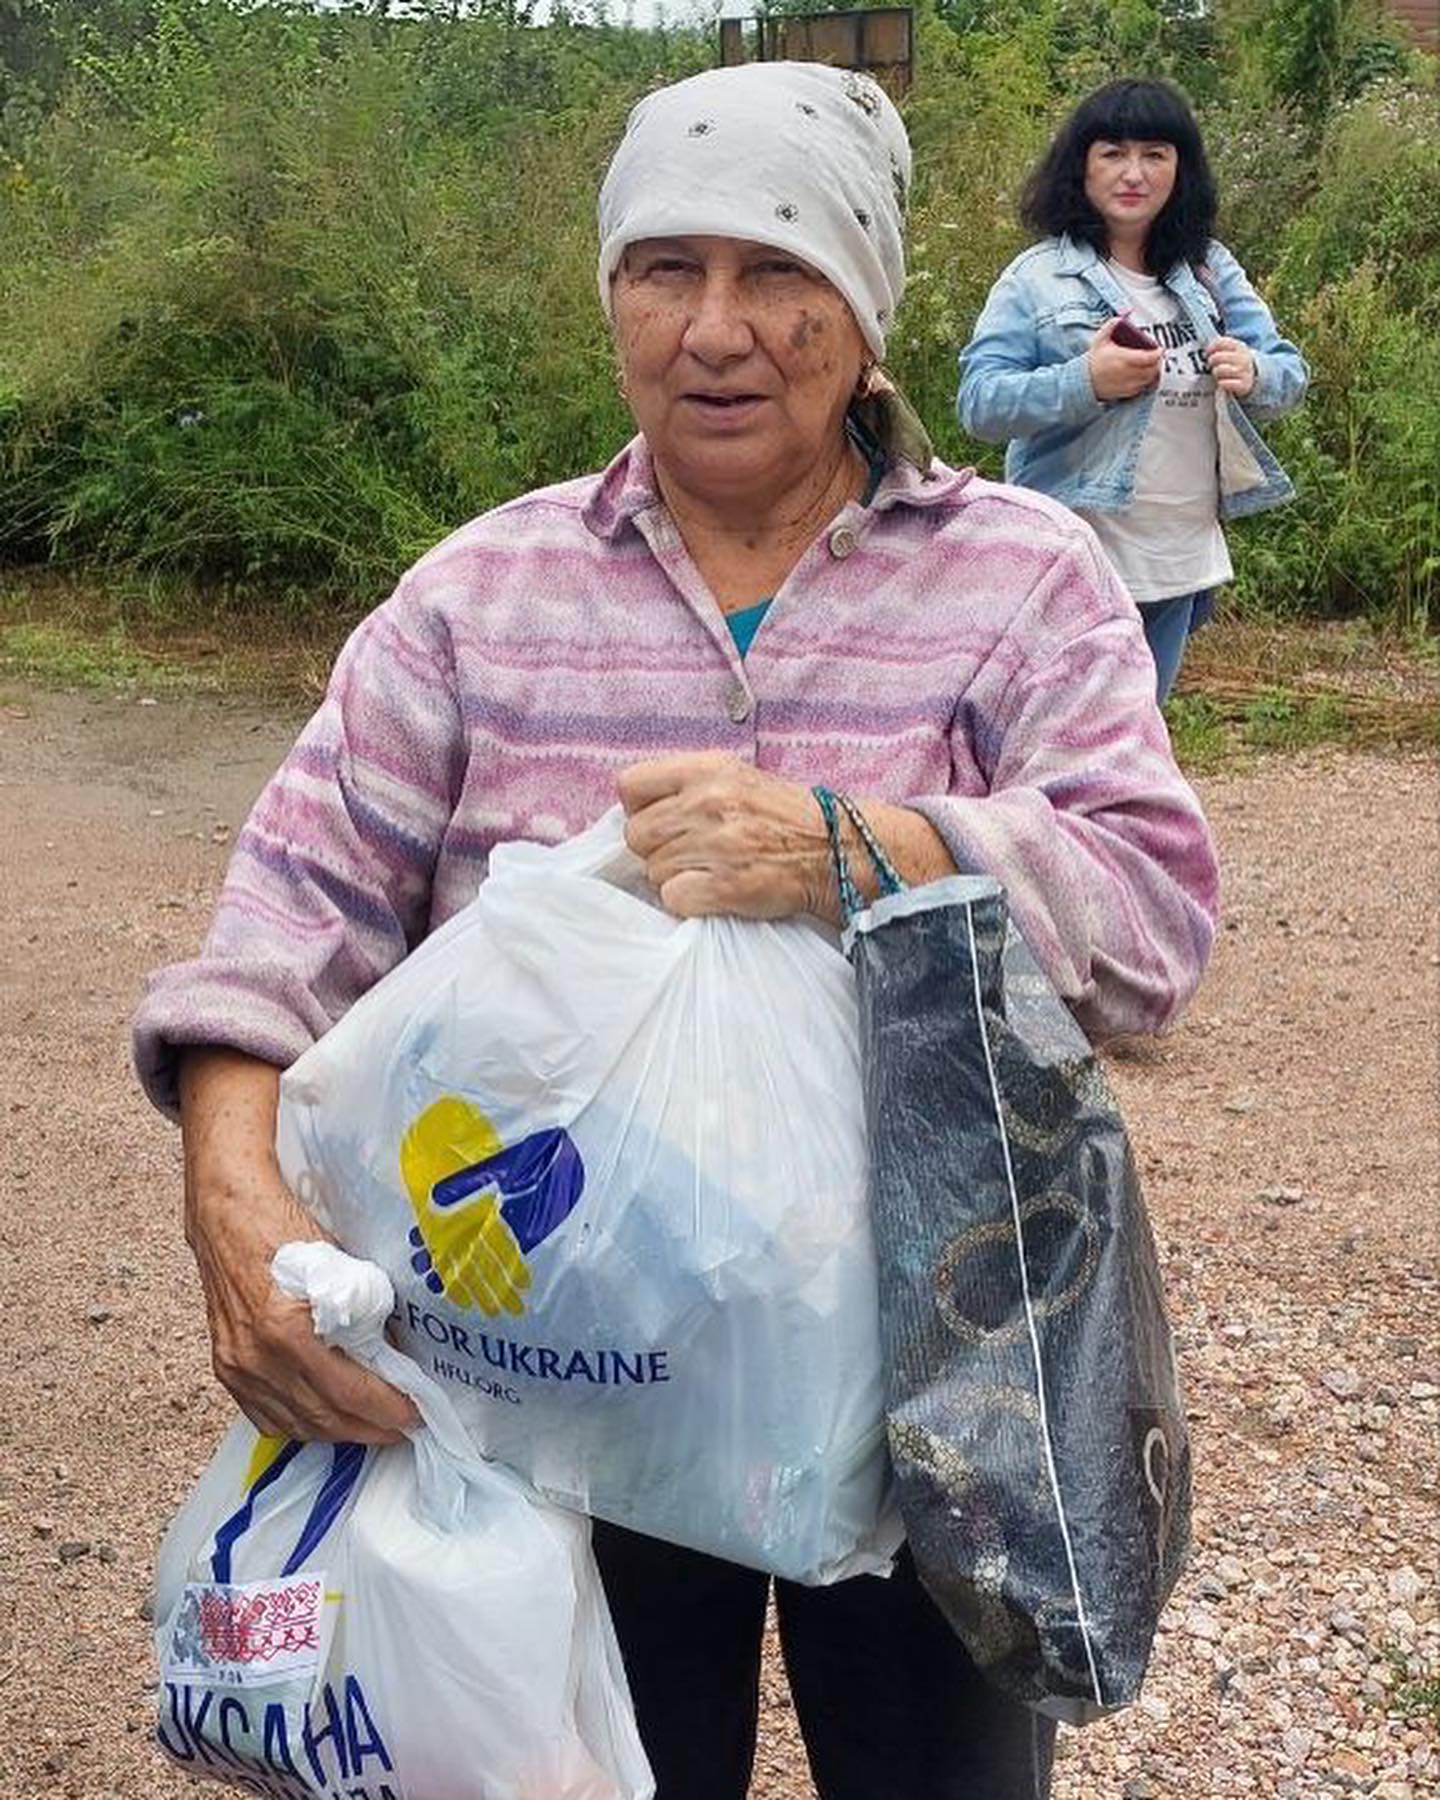 A woman carrying bags of food on a dirt road.